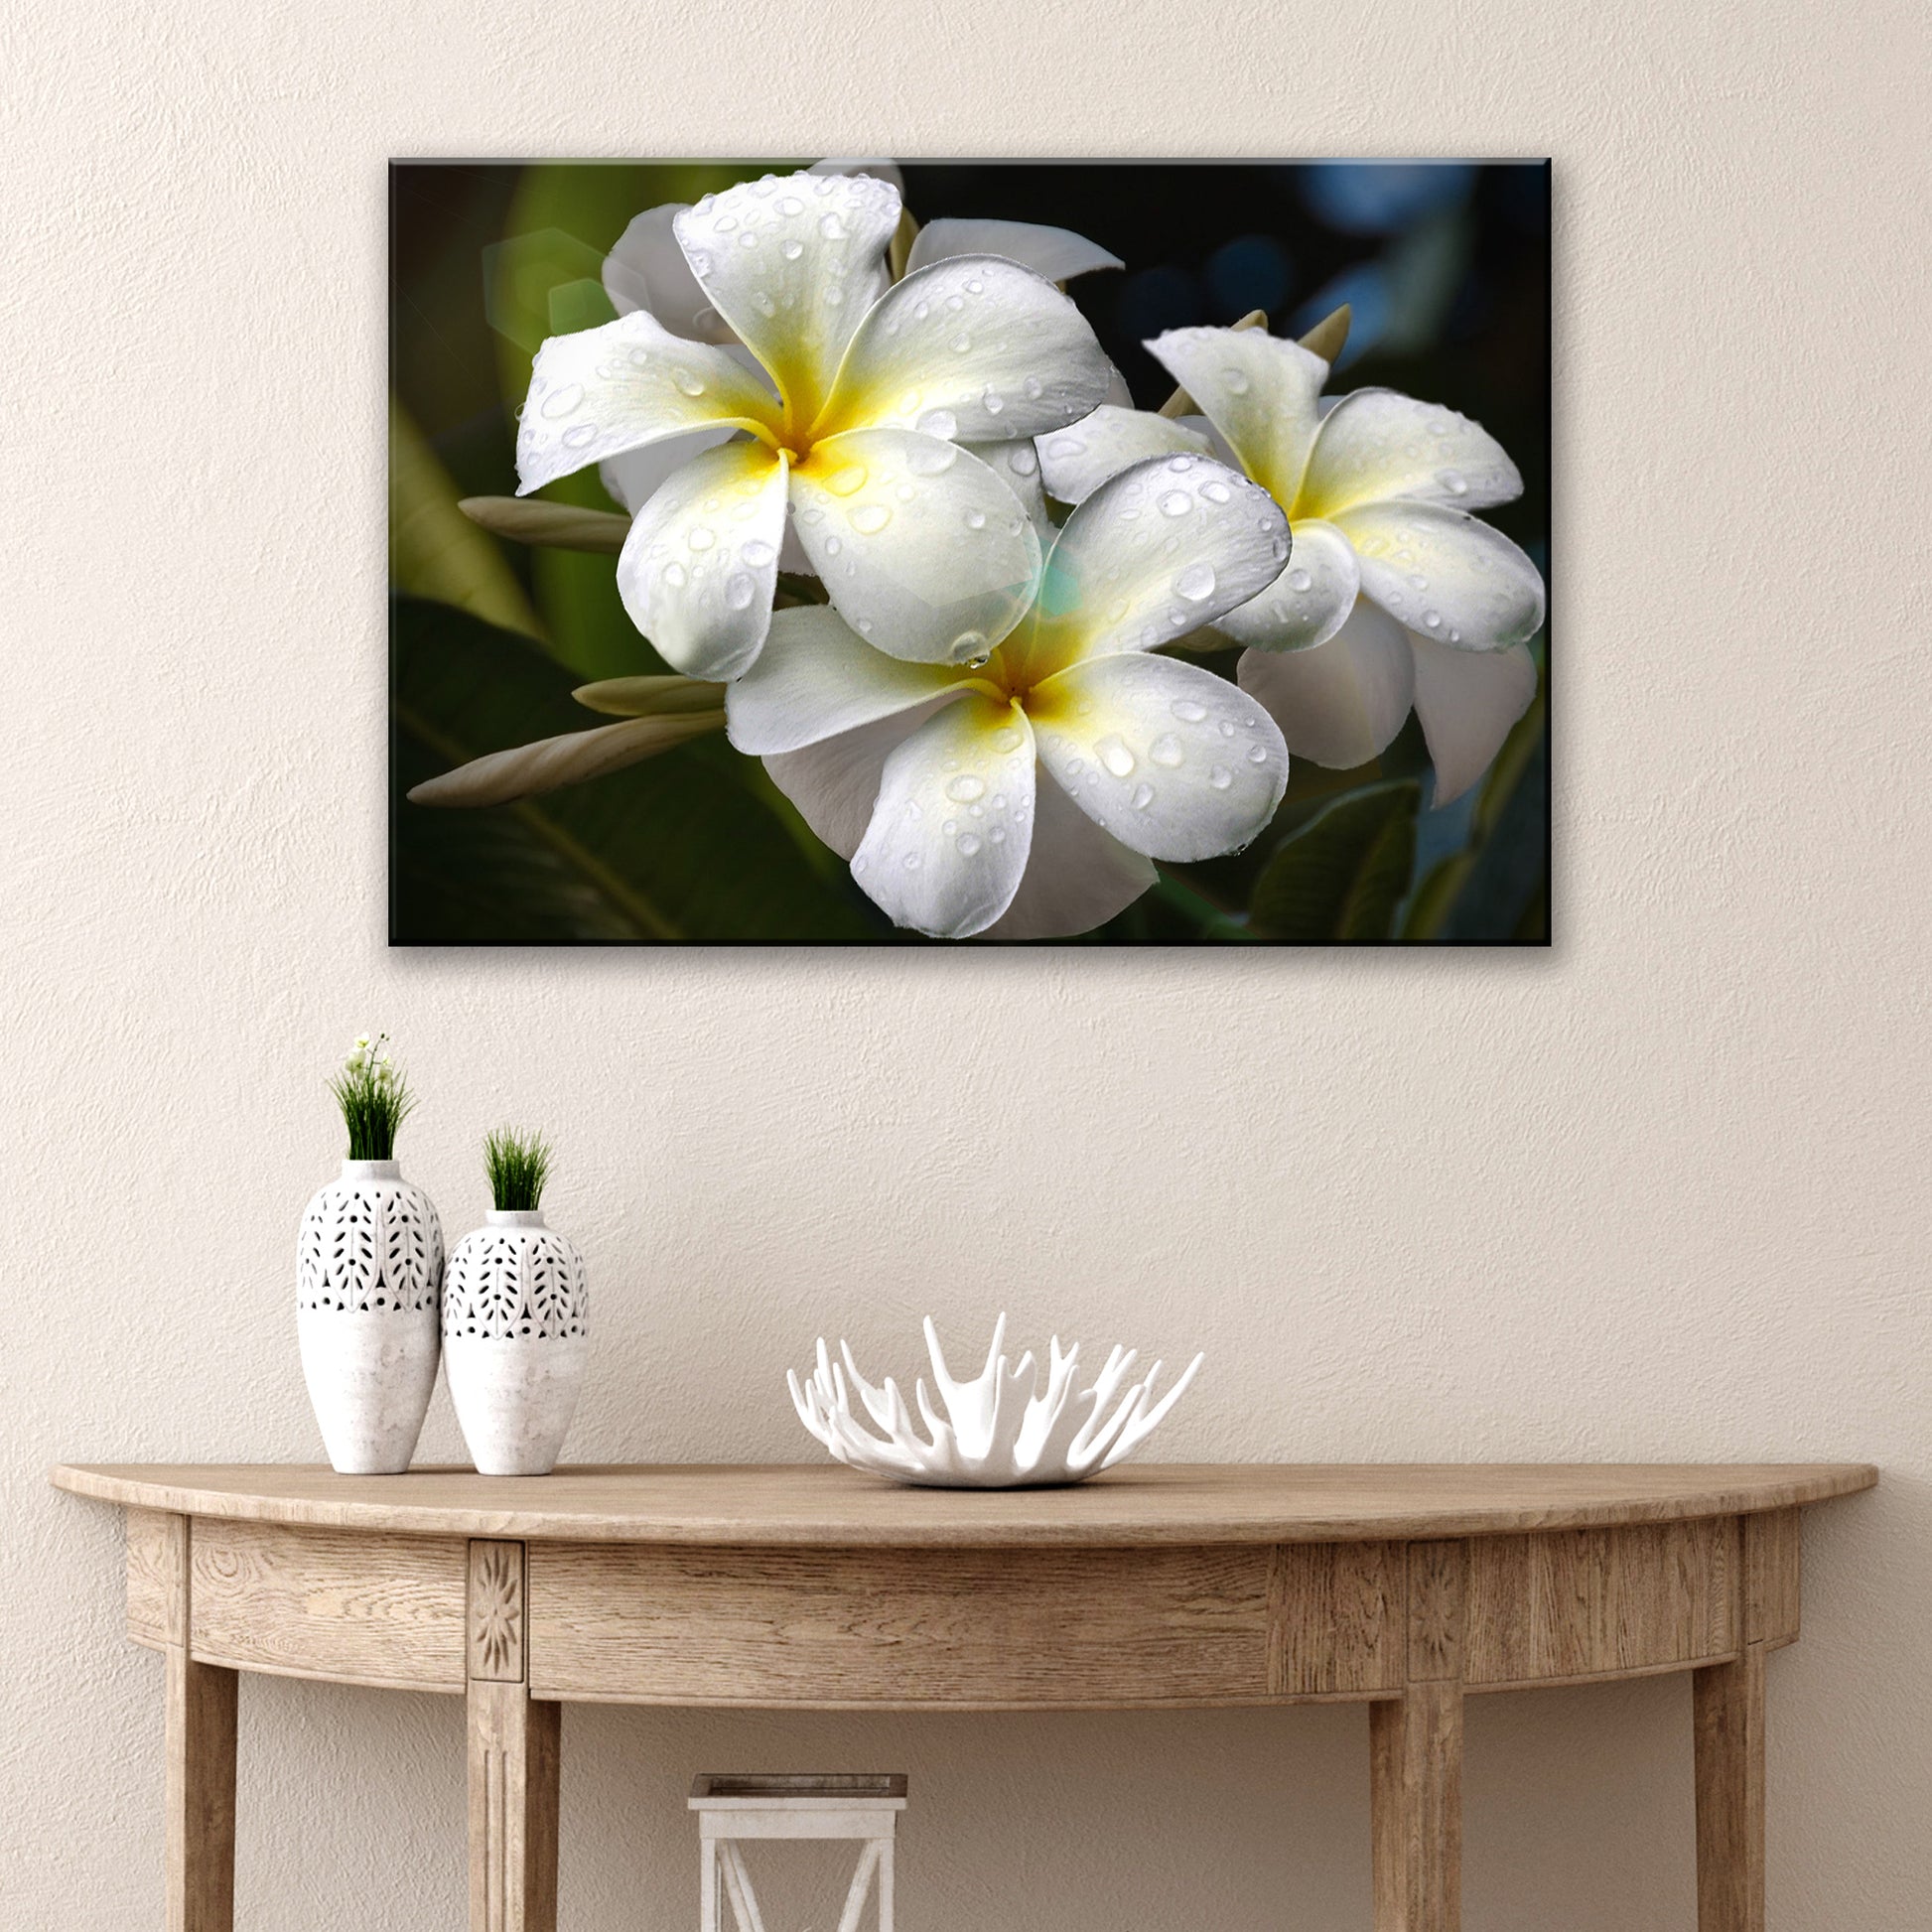 White Frangipani Flower Canvas Wall Art - Image by Tailored Canvases